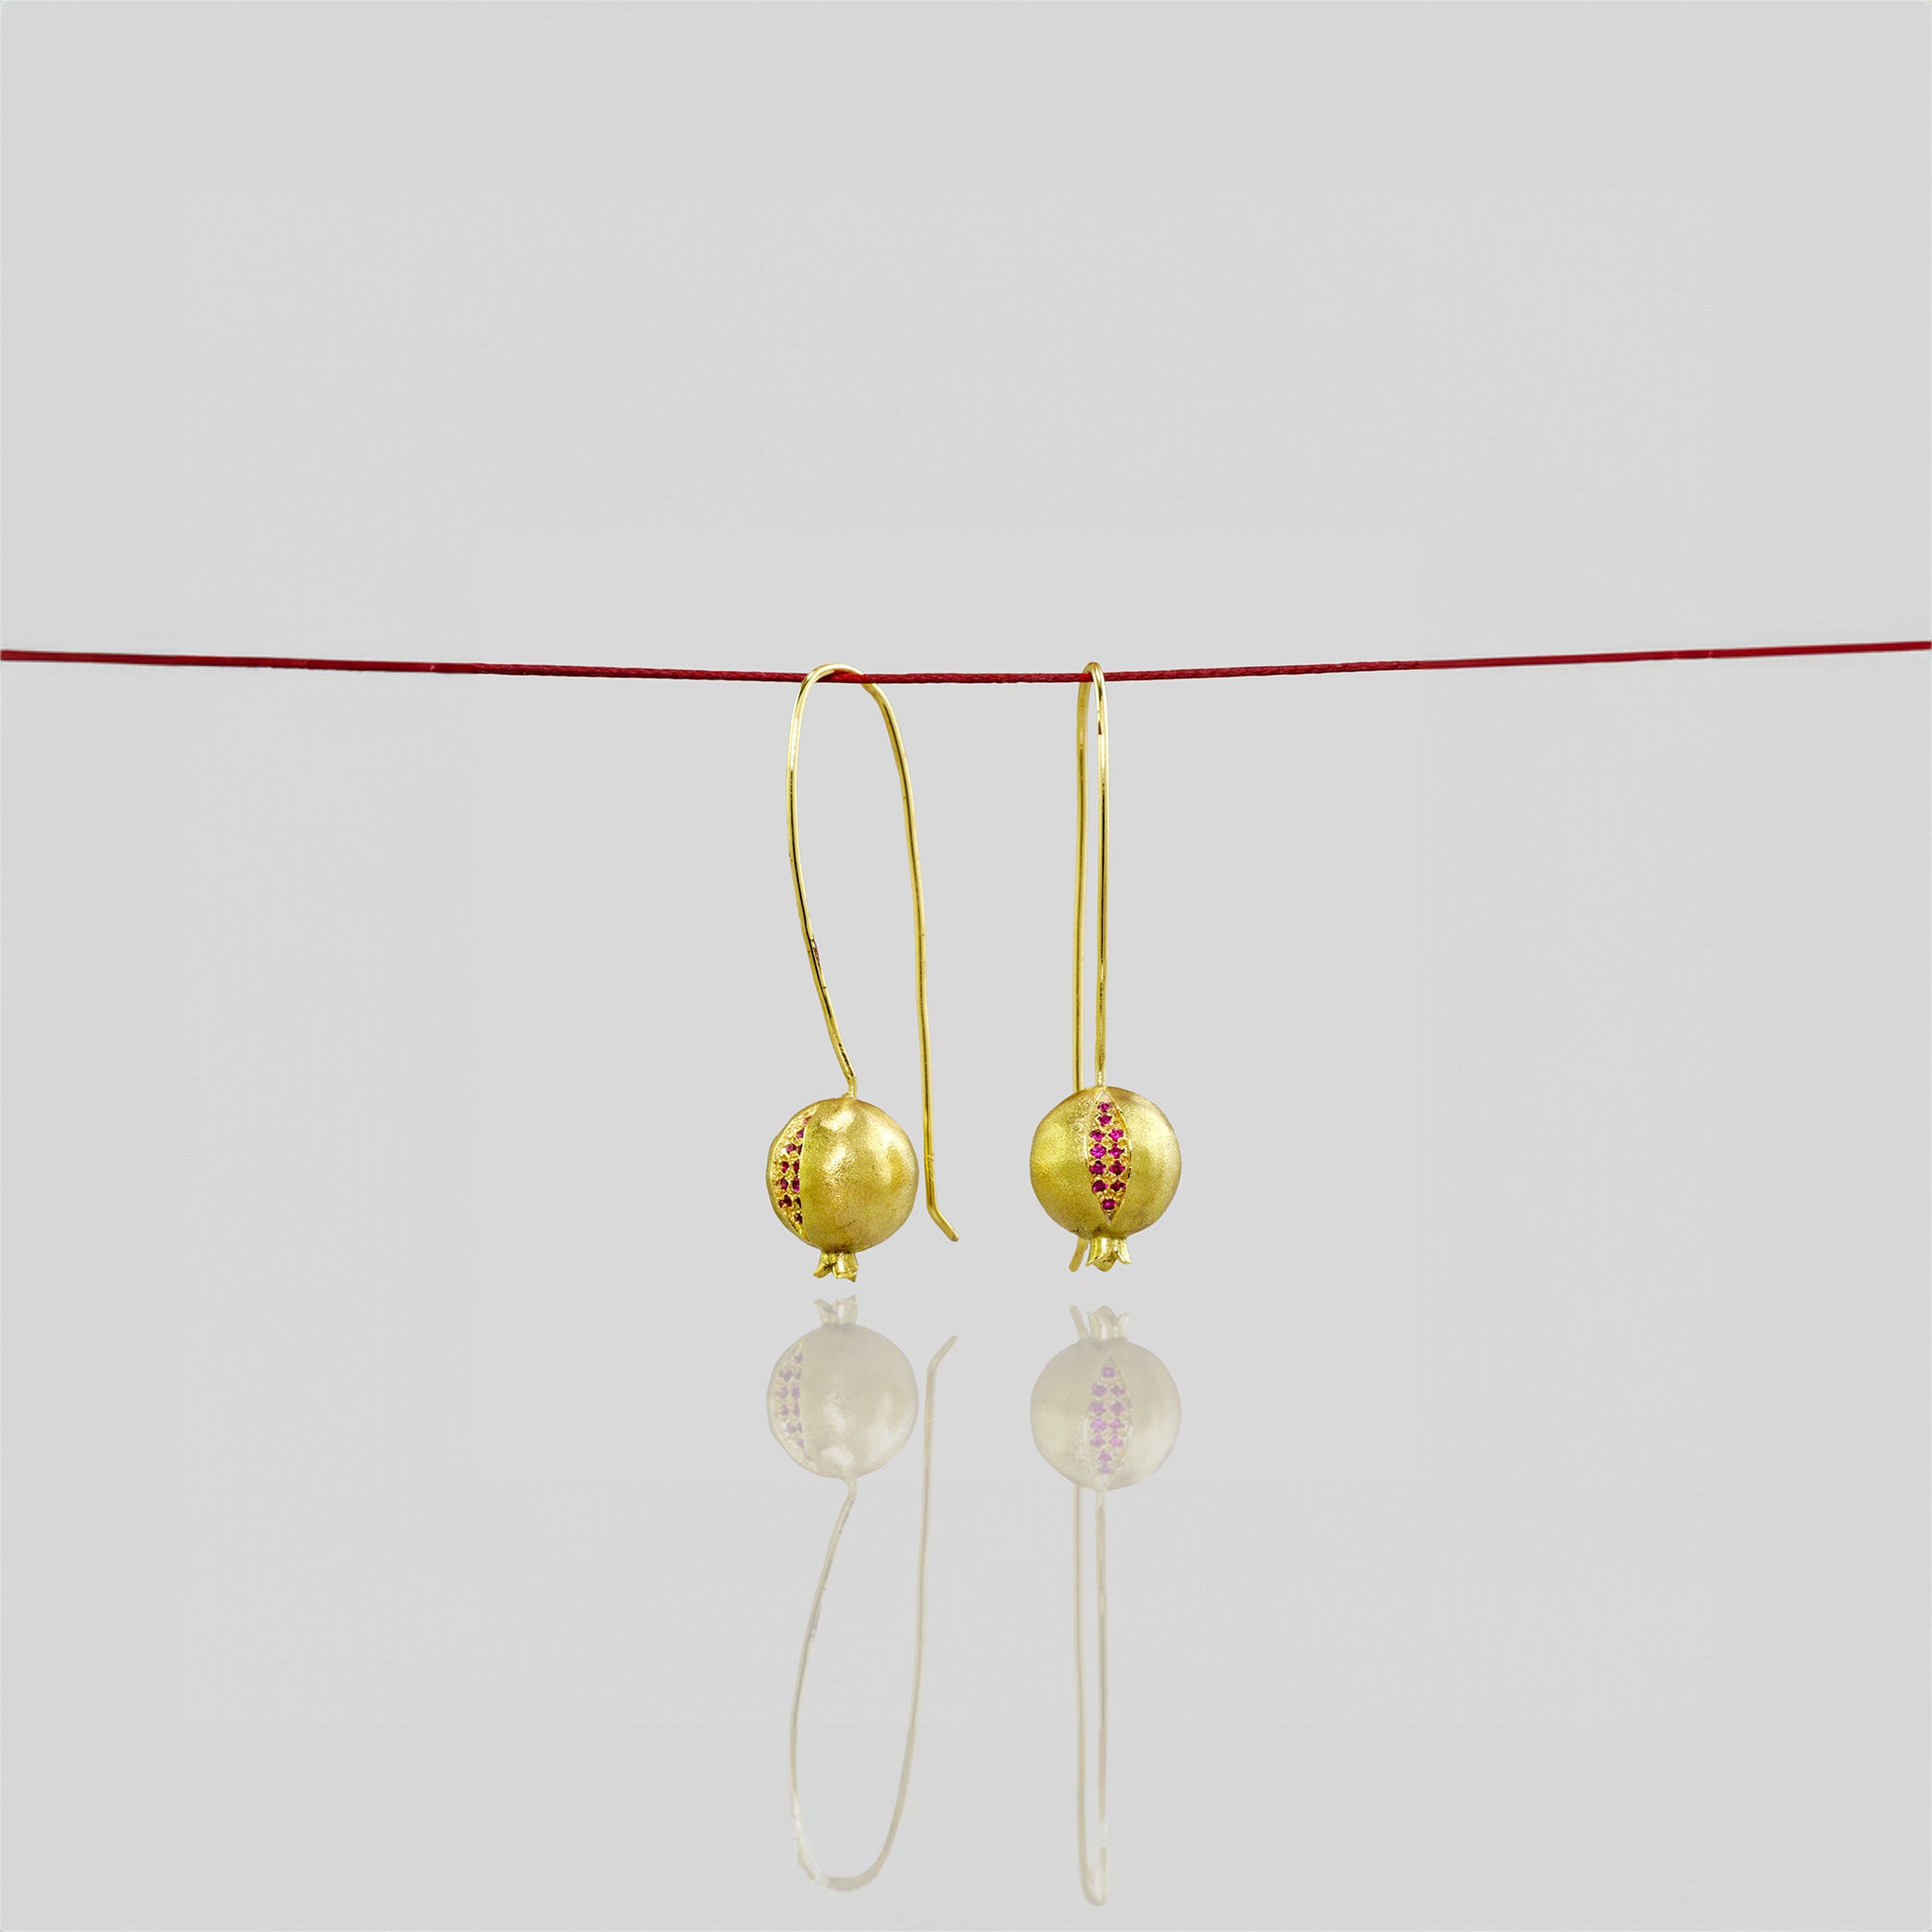 18k Gold Pomegranate Drop Earrings with Sparkling Rubies.